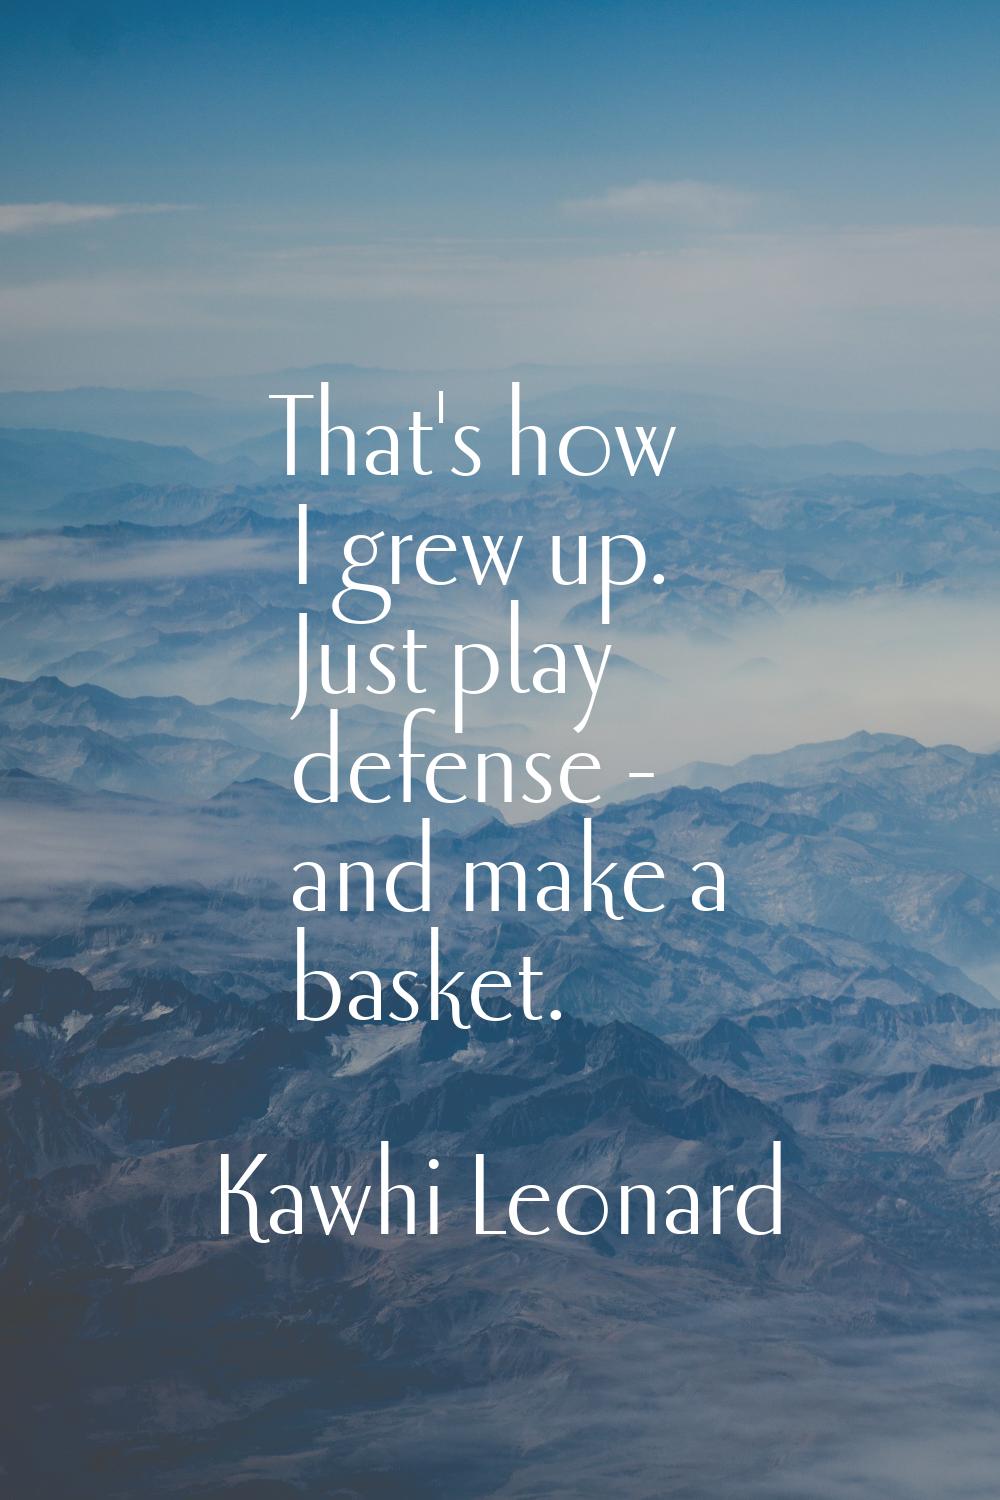 That's how I grew up. Just play defense - and make a basket.